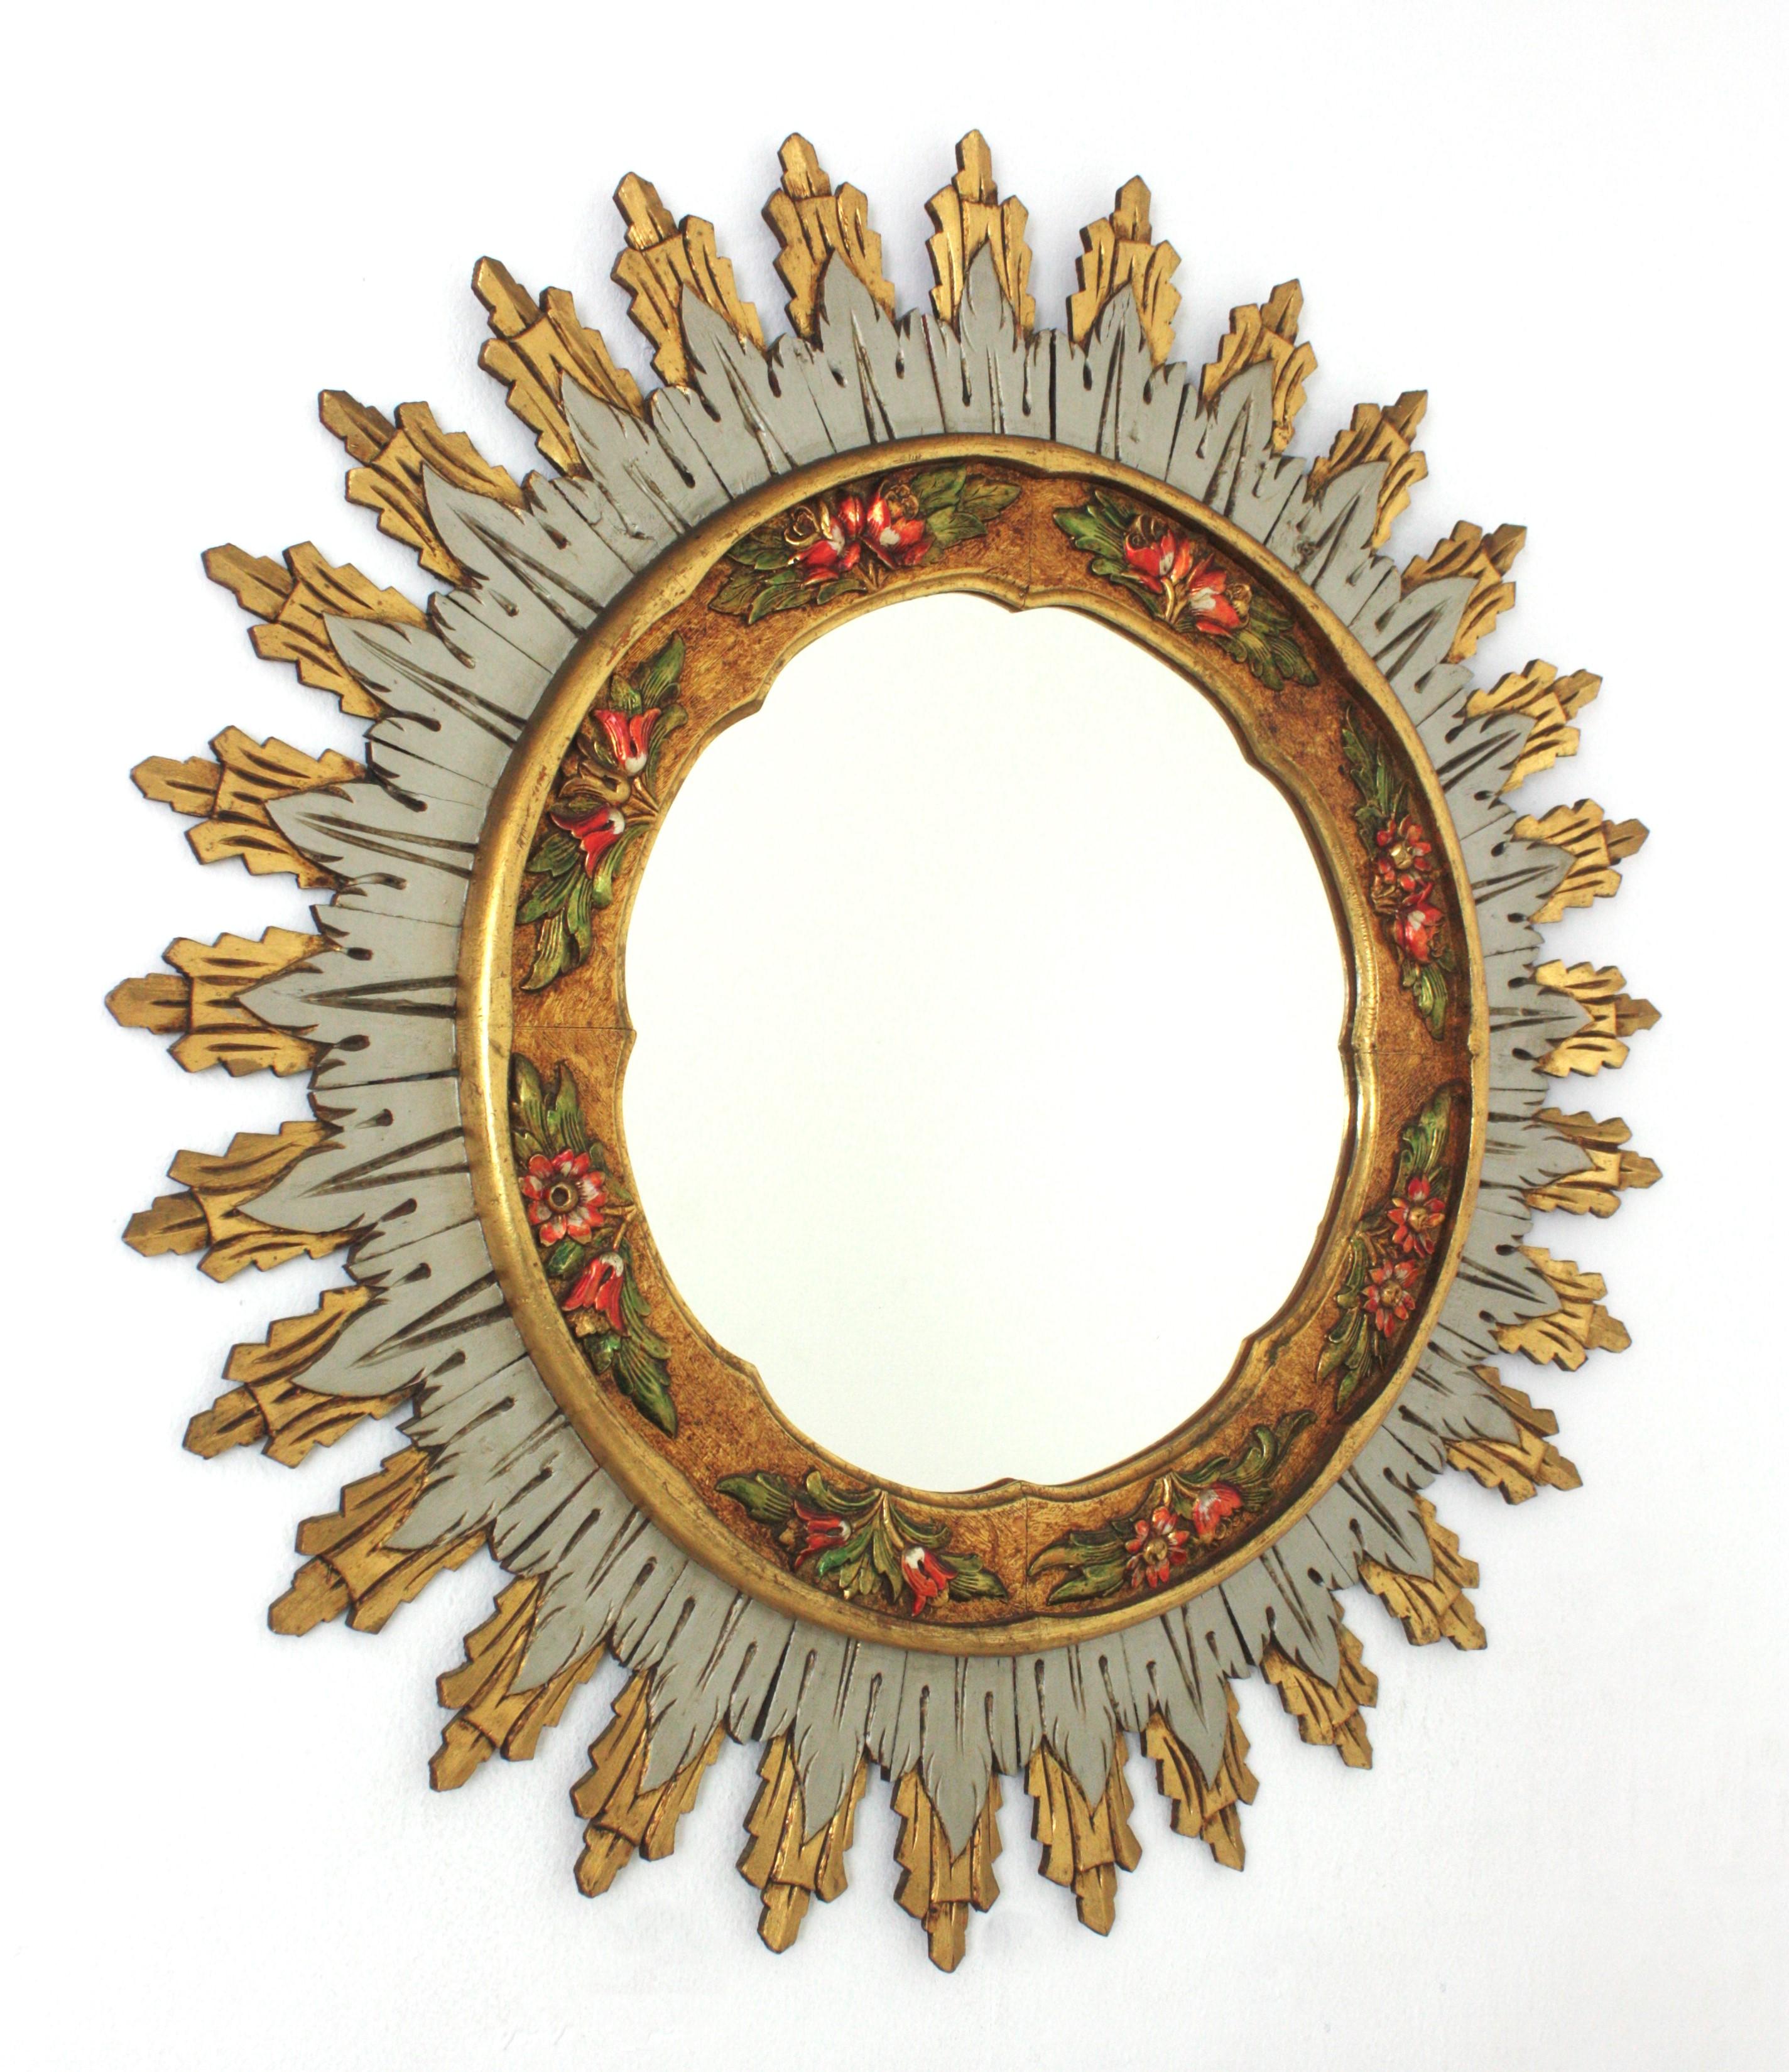 Giltwood Spanish Polychromed Barbola Sunburst Mirror
Double Layered Giltwood Sunburst Mirror with Carved Polychrome Floral Details. Spain, 1960s.
This wall mirror features features a layer of long rays at the back part and a layer of silver